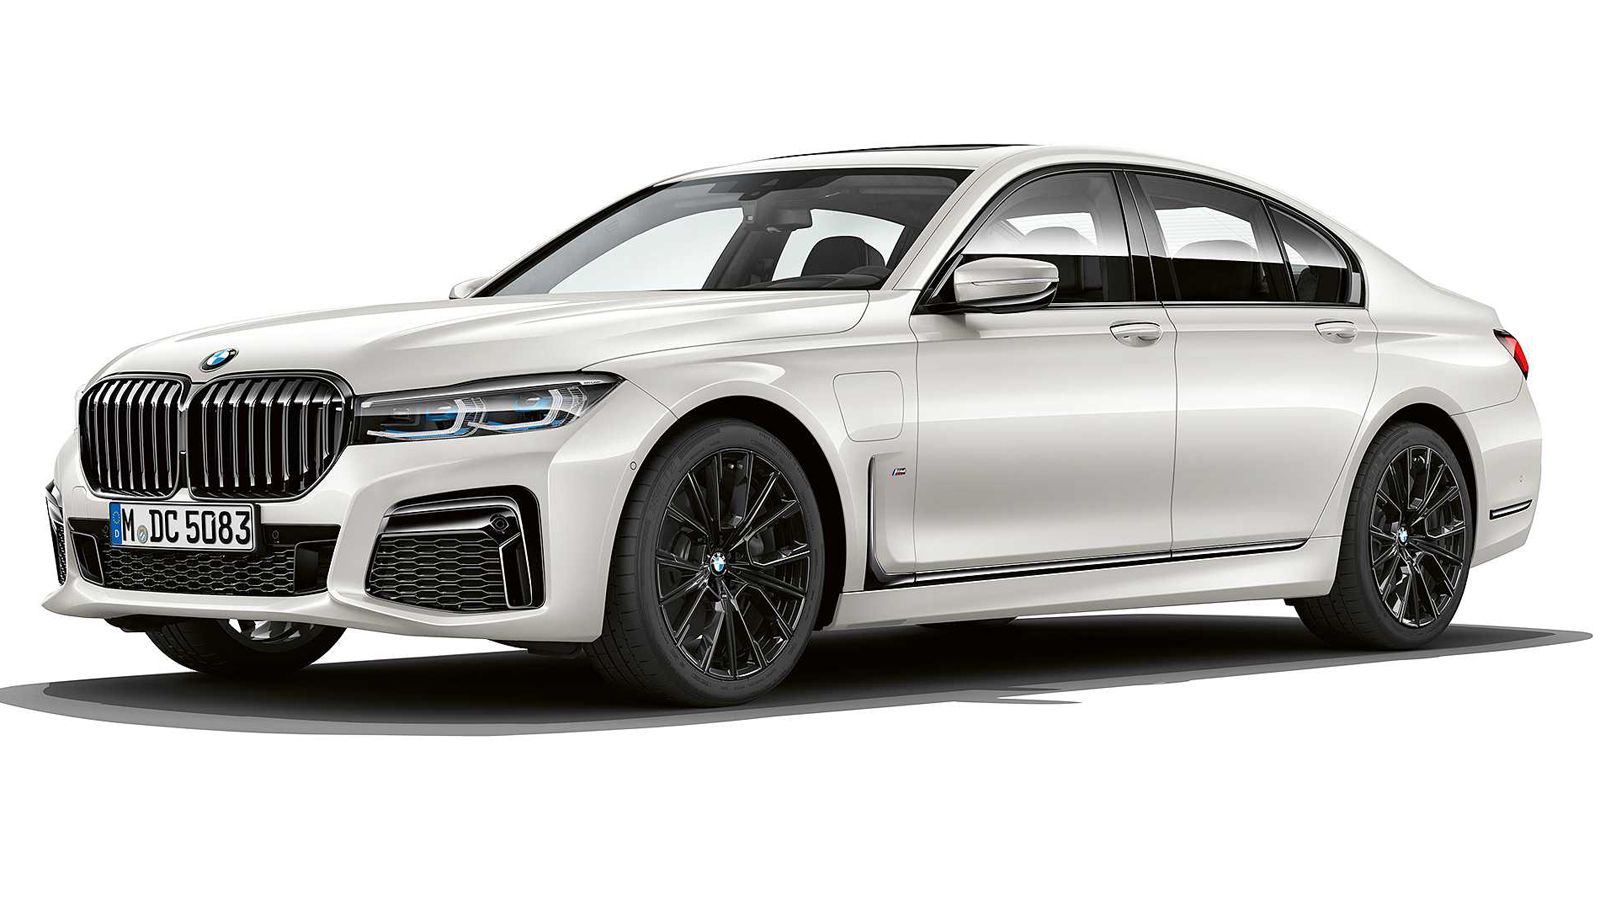 2020 BMW 745e xDrive iPerformance review: Everything you need to know